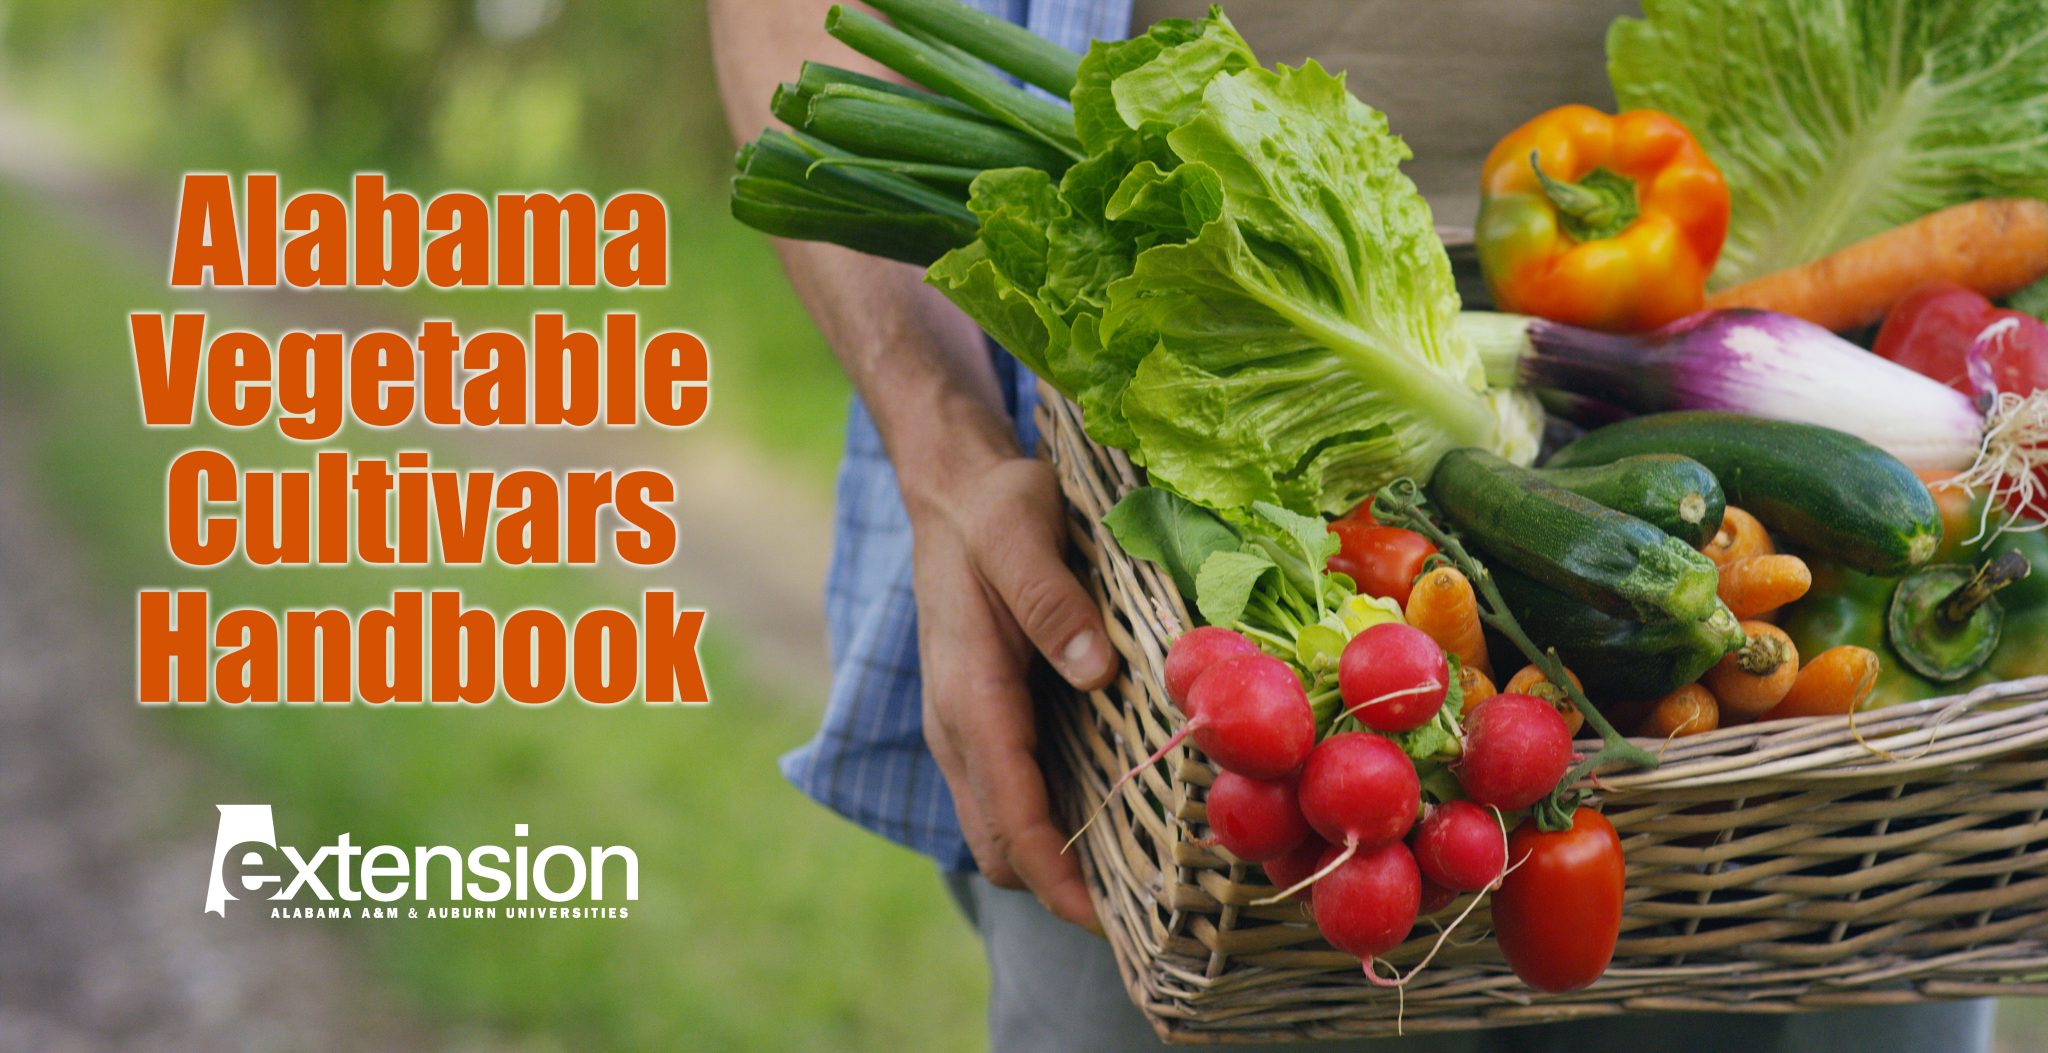 The words "Alabama Vegetable Cultivars Handbook" over an image of a basket with vegetables (cabbage, carrots, cucumbers, radish and peppers) in the hands of a farmer.